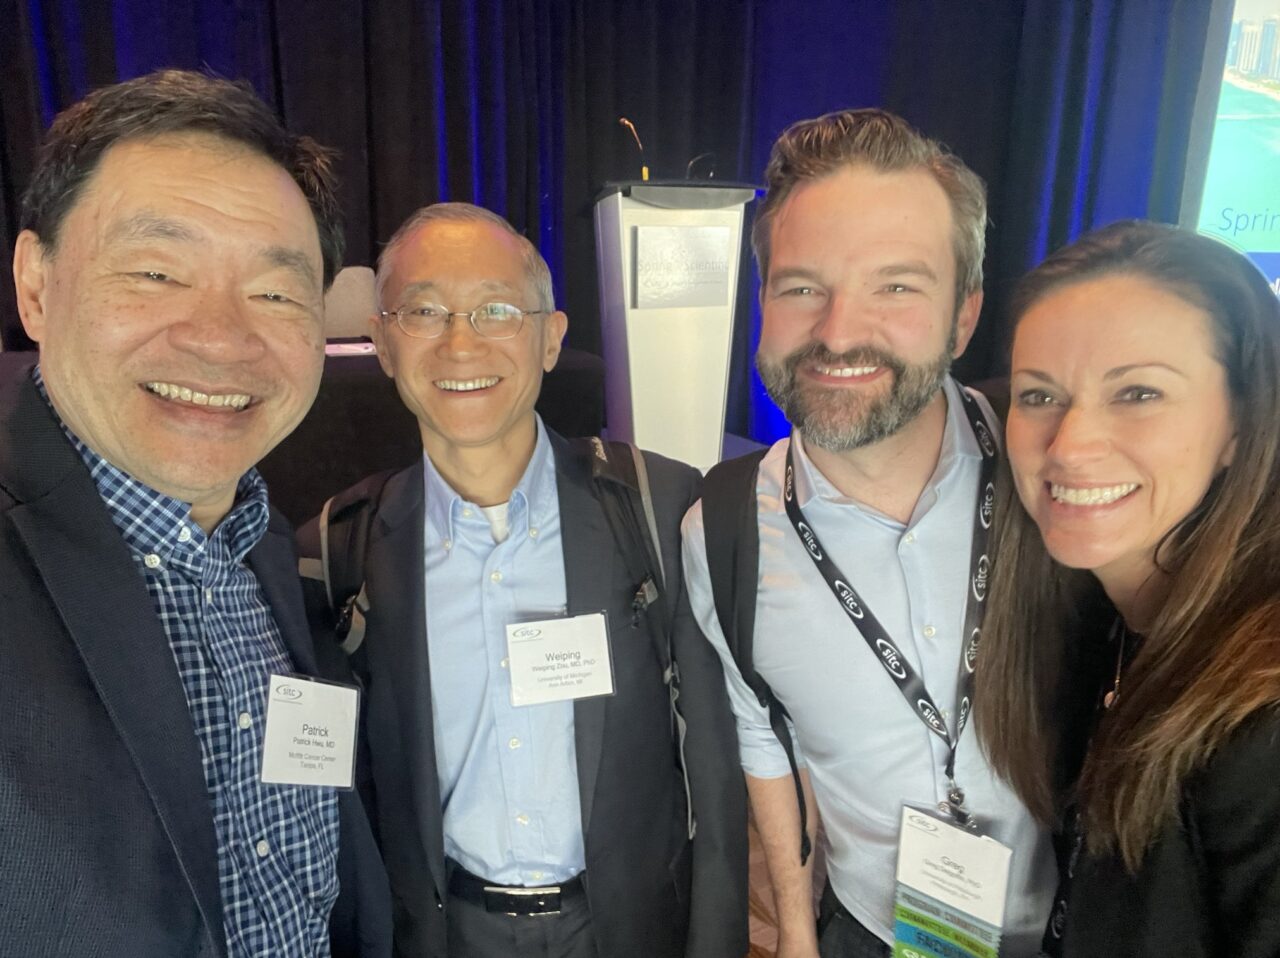 Patrick Hwu: Thank you Greg Delgoffe, Jenn Guerriero and Jen Wargo for organizing such a cutting edge SITC meeting on immunometabolism and cancer